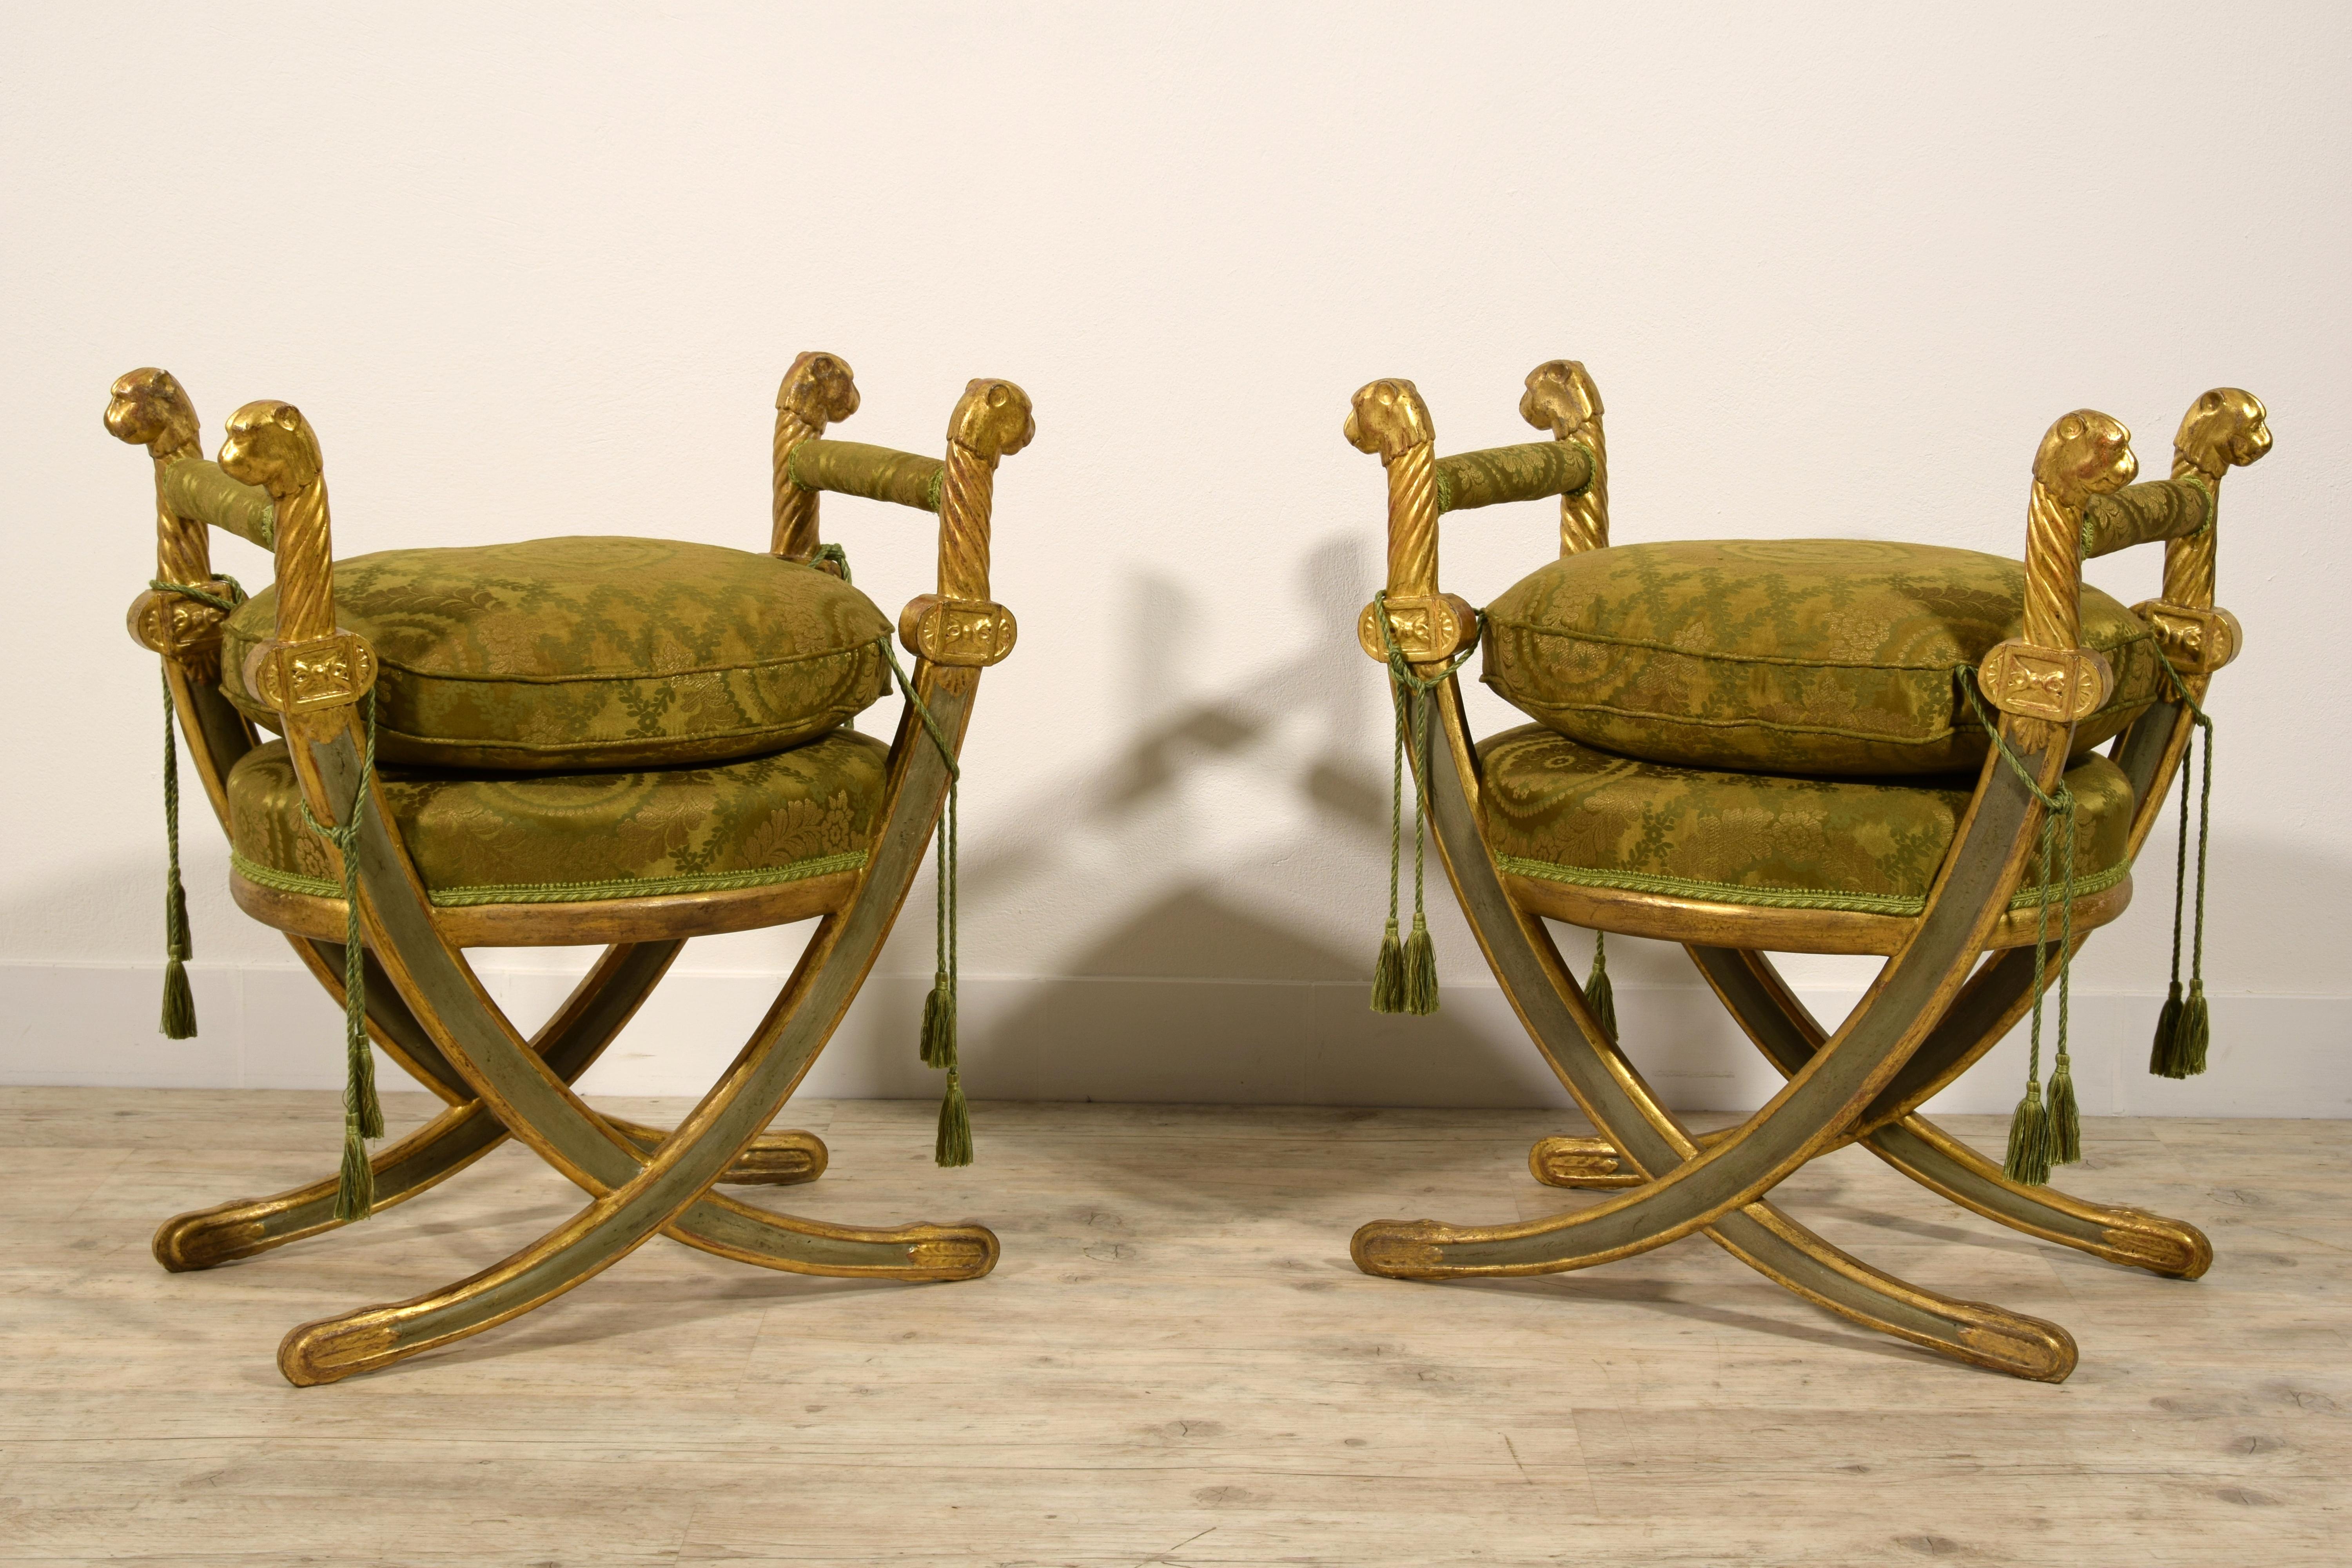 20th century, pair of neoclassical Italian carved Lacquered gilt wood stools

Measurements: cm W 65 x D 43.5 x H 72. Seat height with cushion 59 cm; seat height without cushion 44 cm

This particular pair of stools was made in Italy at the beginning